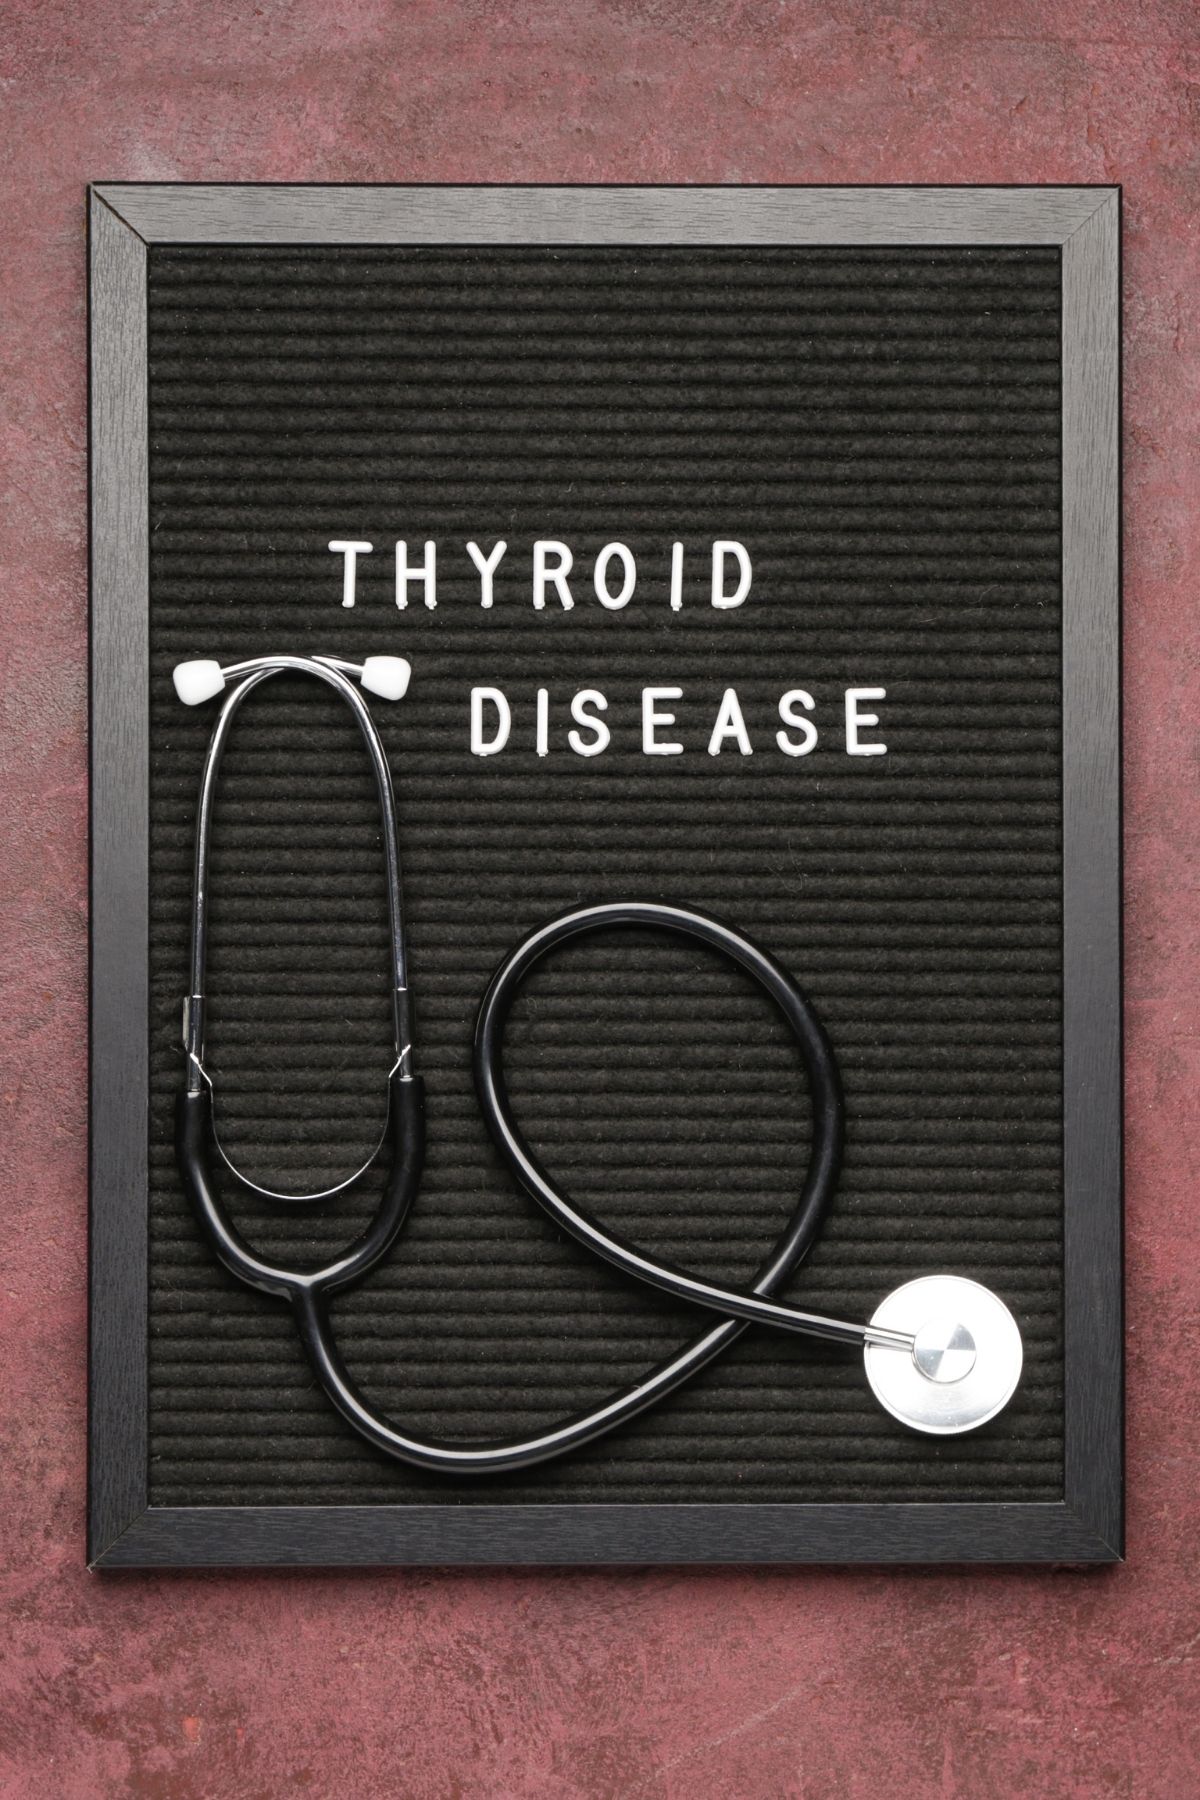 sign that says thyroid disease on it with a stethoscope